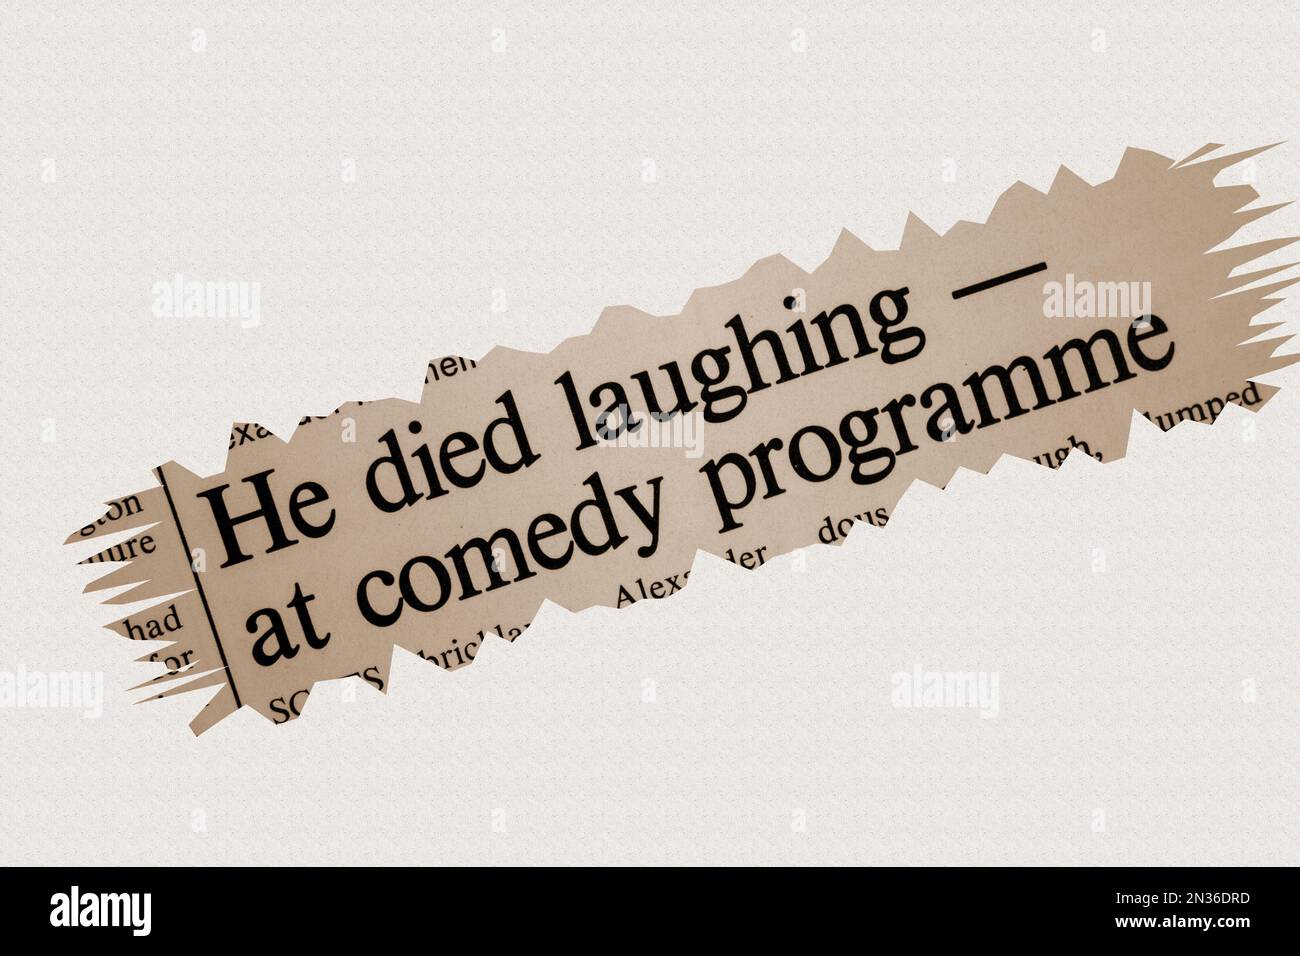 He died laughing - at comedy programme - news story from 1975 newspaper headline article title in sepia Stock Photo